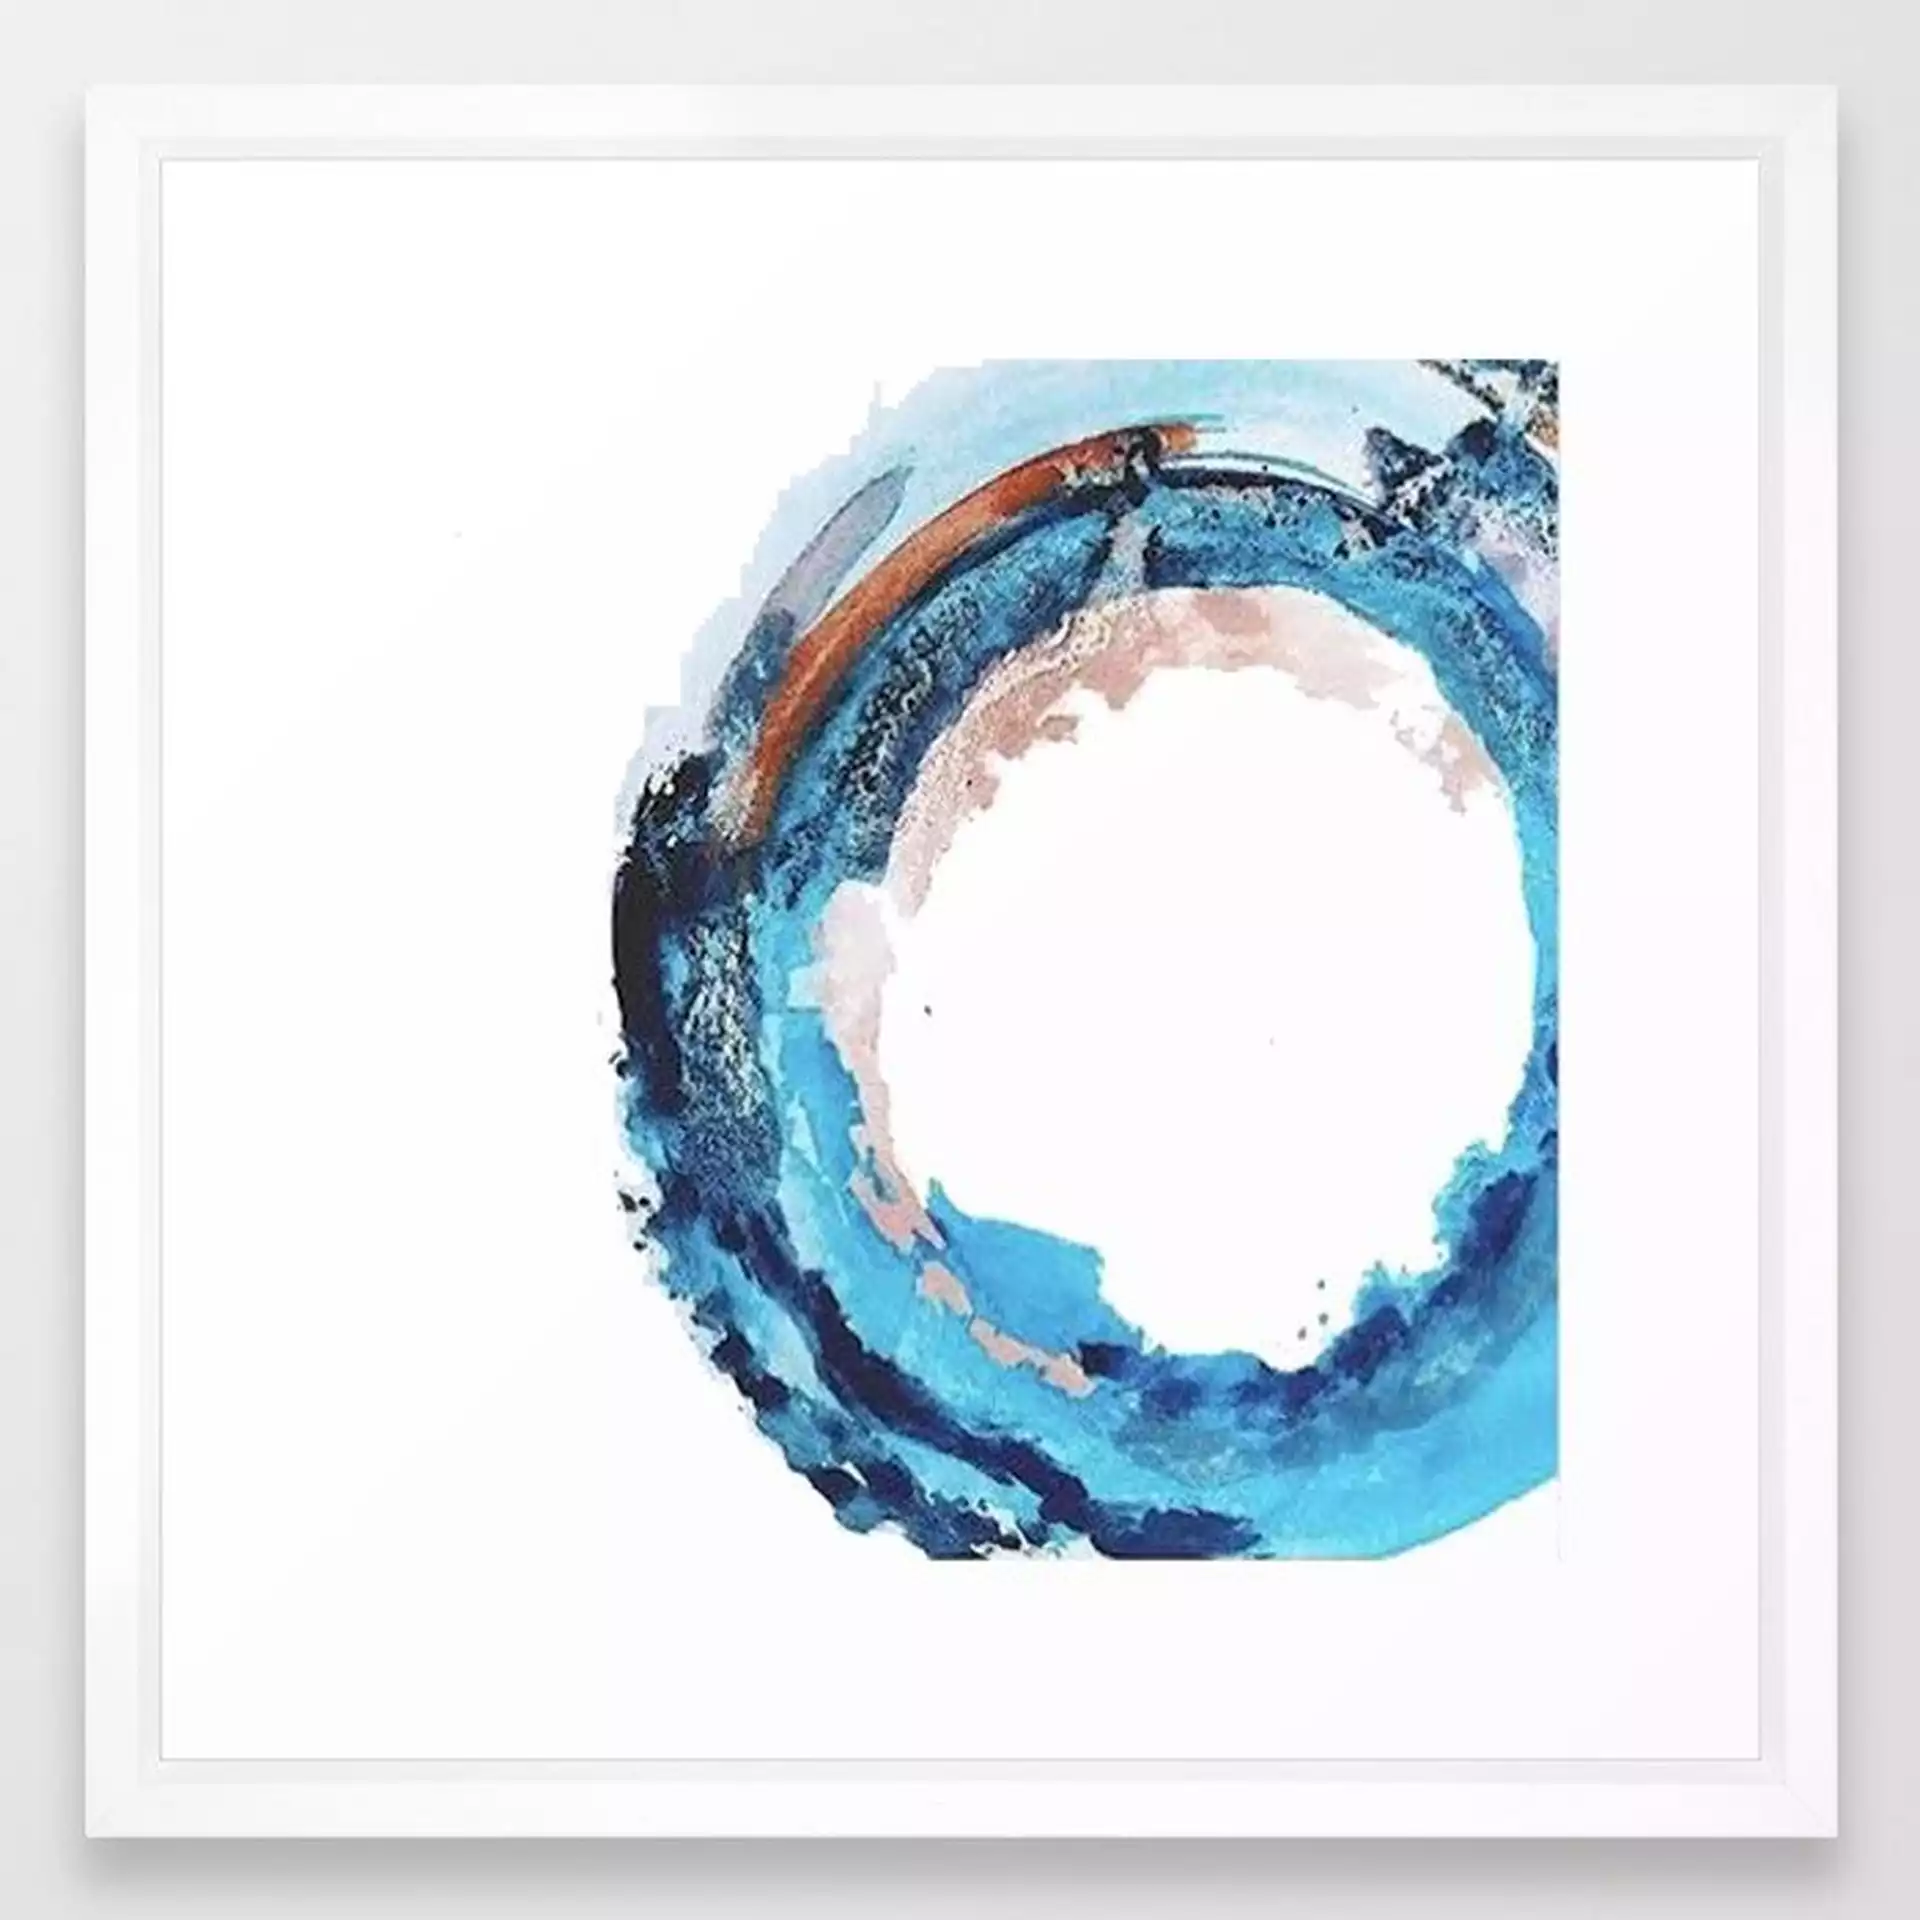 Galaxy: A Minimal, Colorful Watercolor In Pinks And Blues By Alyssa Hamilton Art Framed Art Print by Alyssa Hamilton Art - Vector White - MEDIUM (Gallery)-22x22